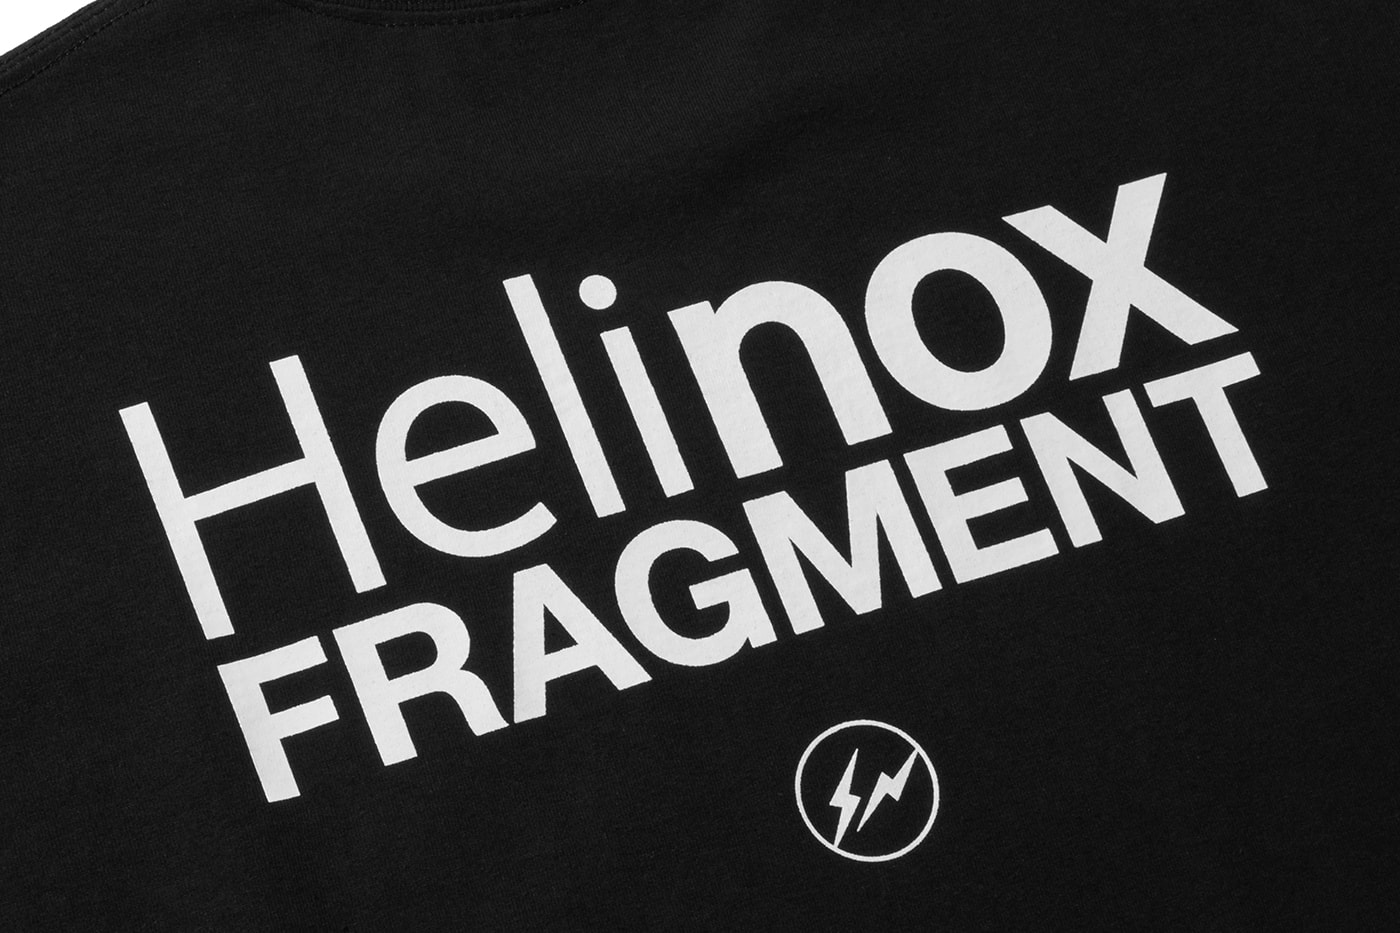 Helinox fragment design Limited-Edition T-shirt Collaboration HCC Busan Release Info